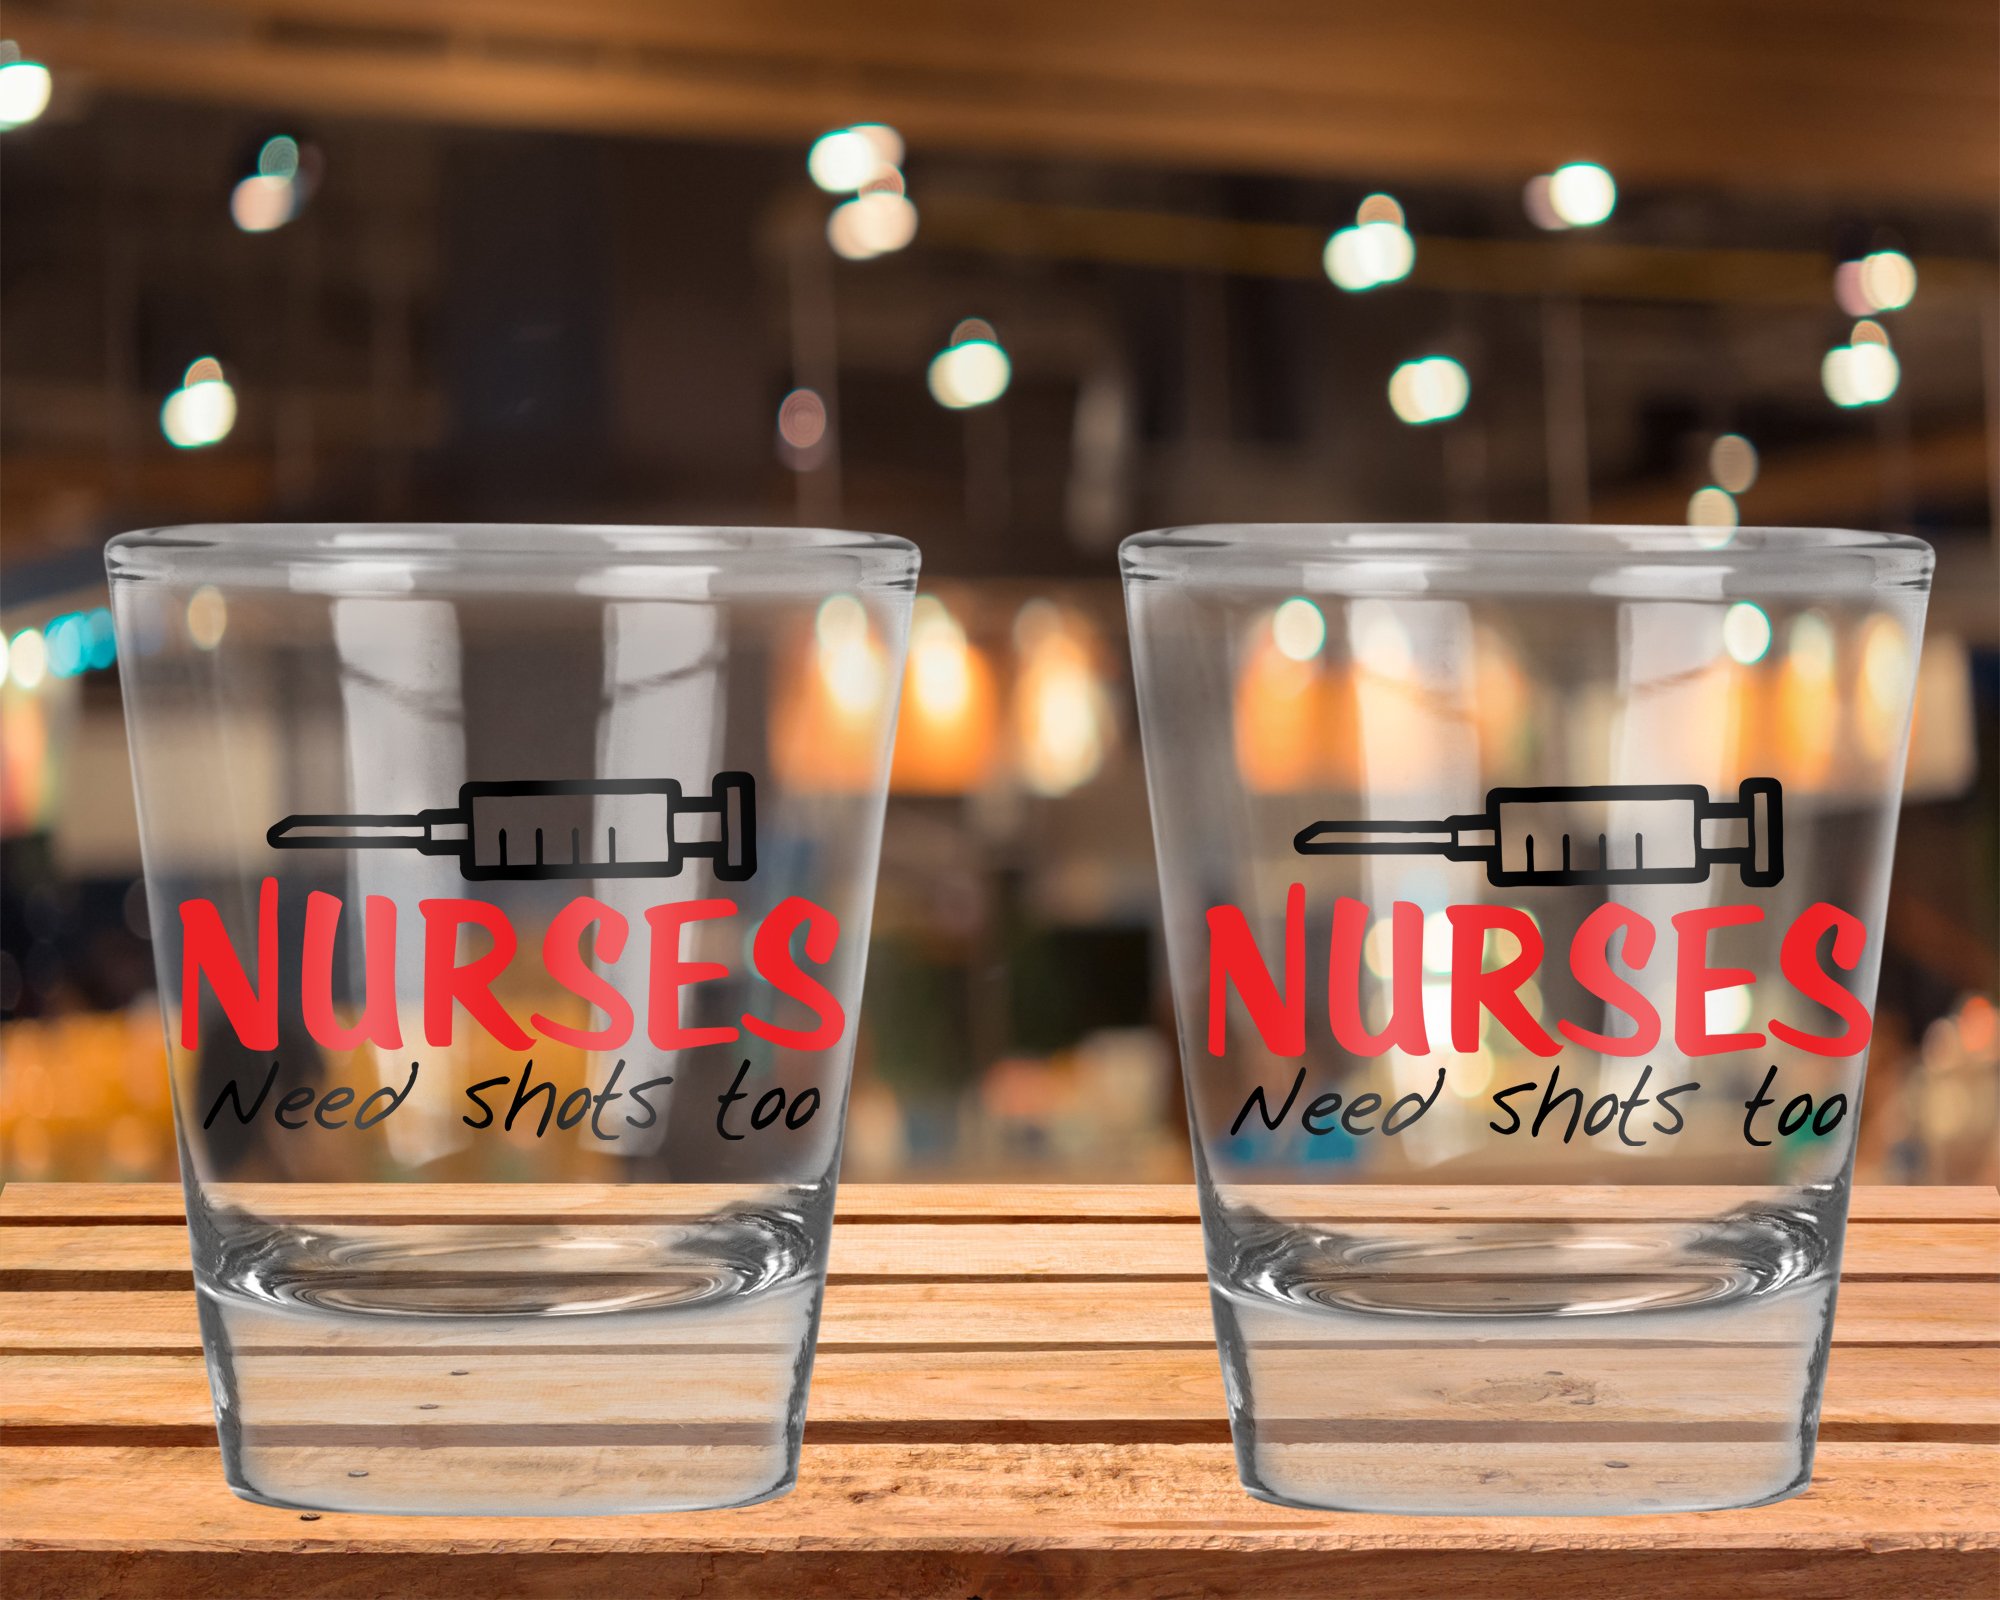 AW Fashions Nurses Need Shots Too - Funny Nurse Party Favor Gift - 2 Pack Round Set of Shot Glass